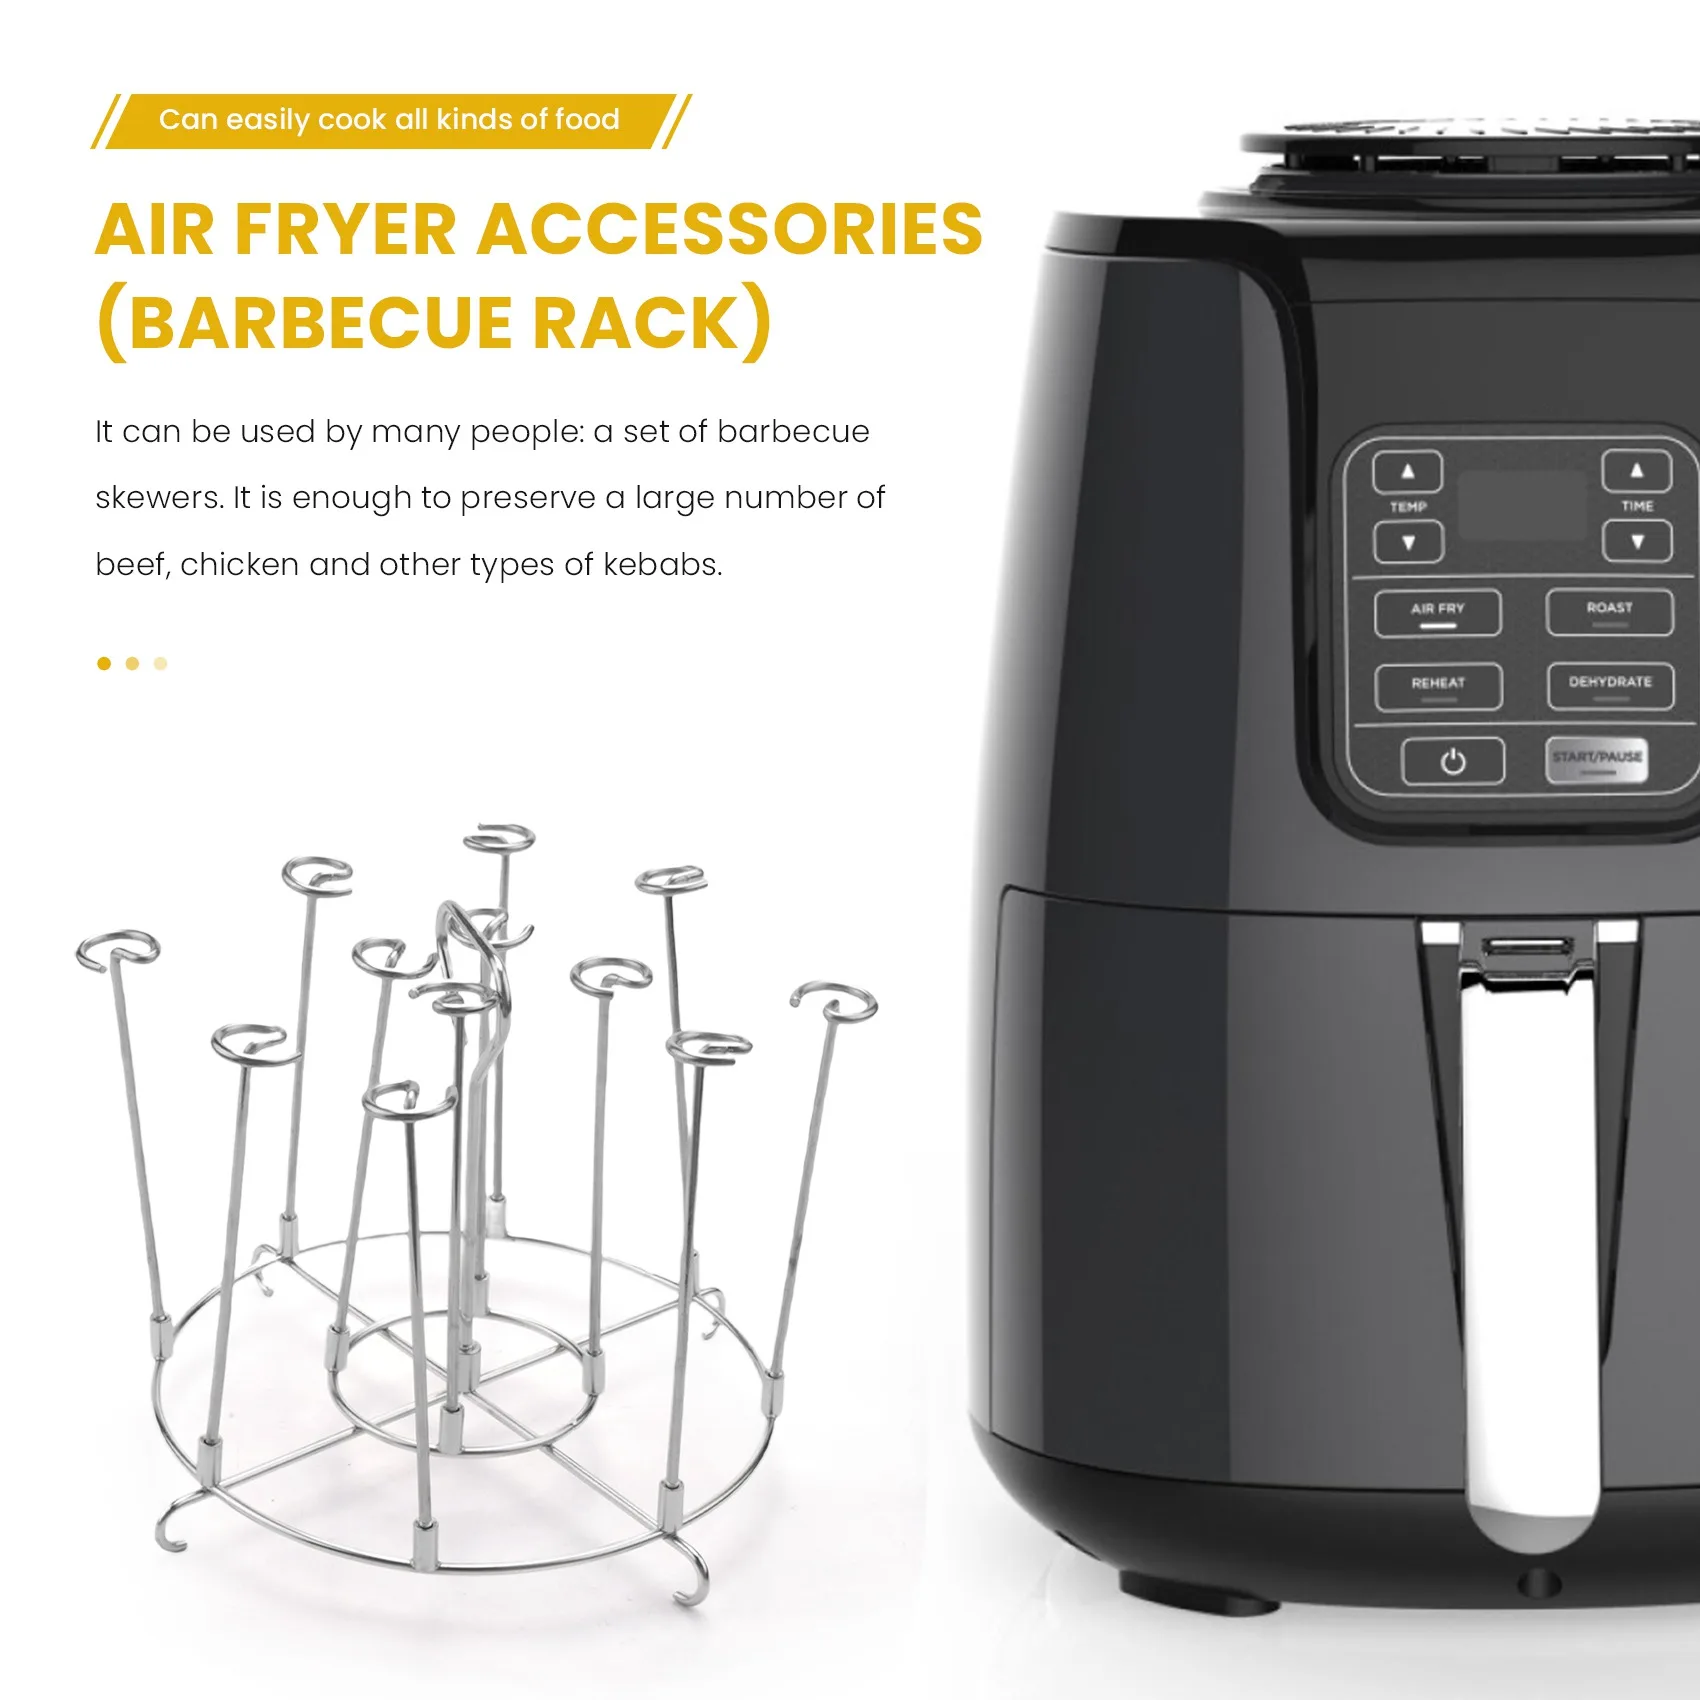 https://ae01.alicdn.com/kf/Sd193a3307d6d485fabe1ded741dec9411/Skewer-Stand-Air-Fryer-Accessories-Grill-for-Home-Kitchen-for-Ninja-Foodi-6-Quart-Dehydrator-Rack.jpg